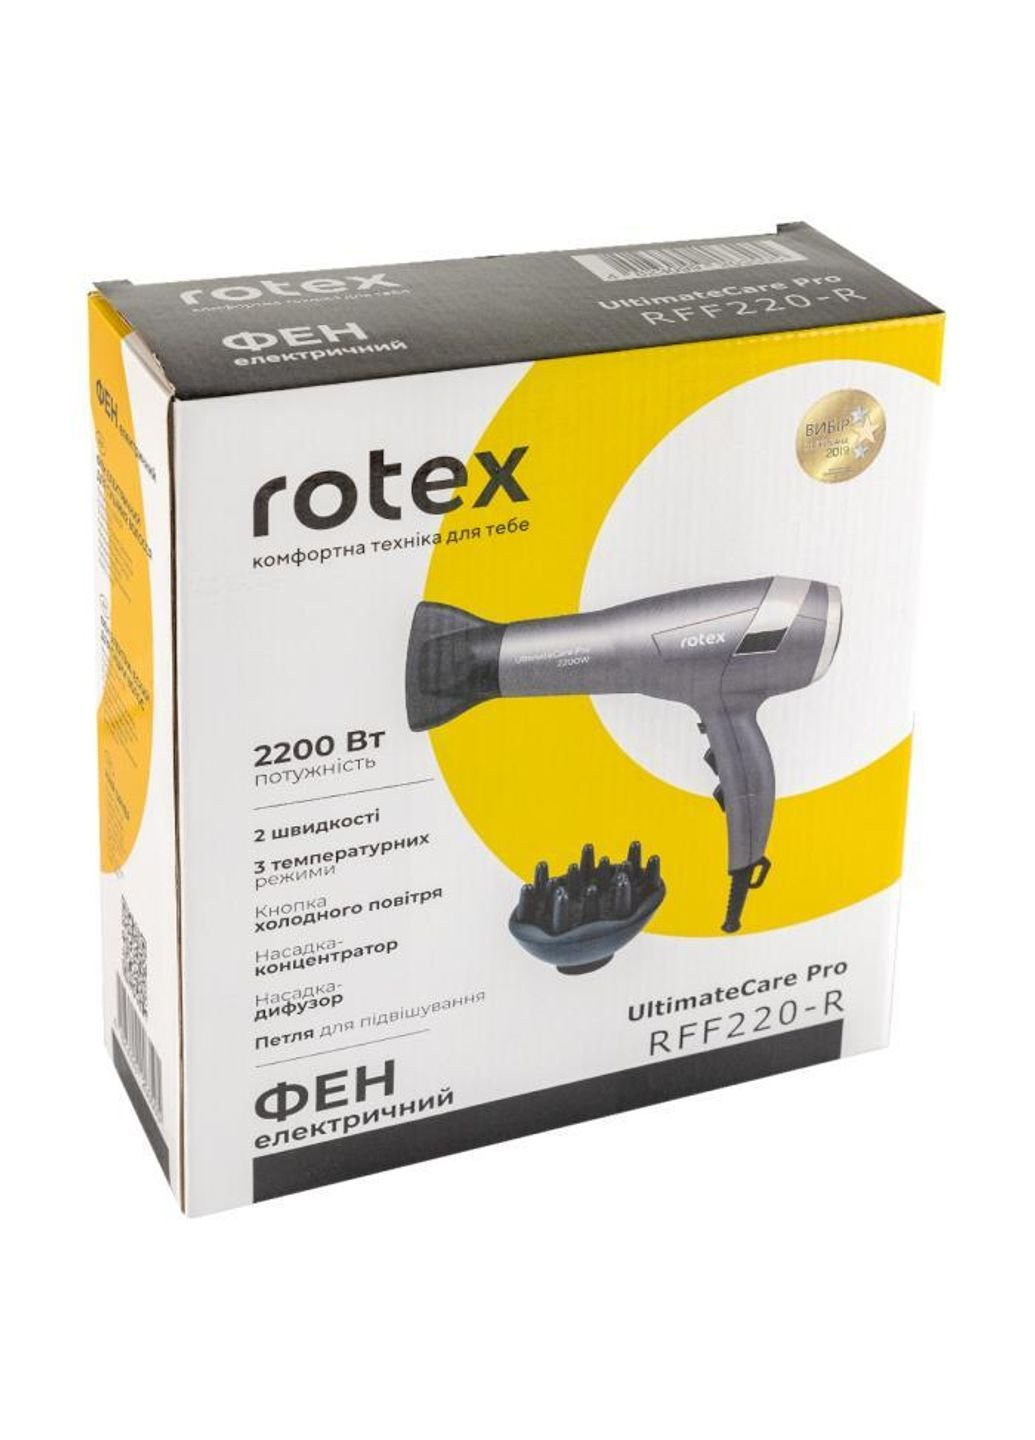 Фен Ultimate Care Pro 220-R 2200 Вт Rotex (253866058)